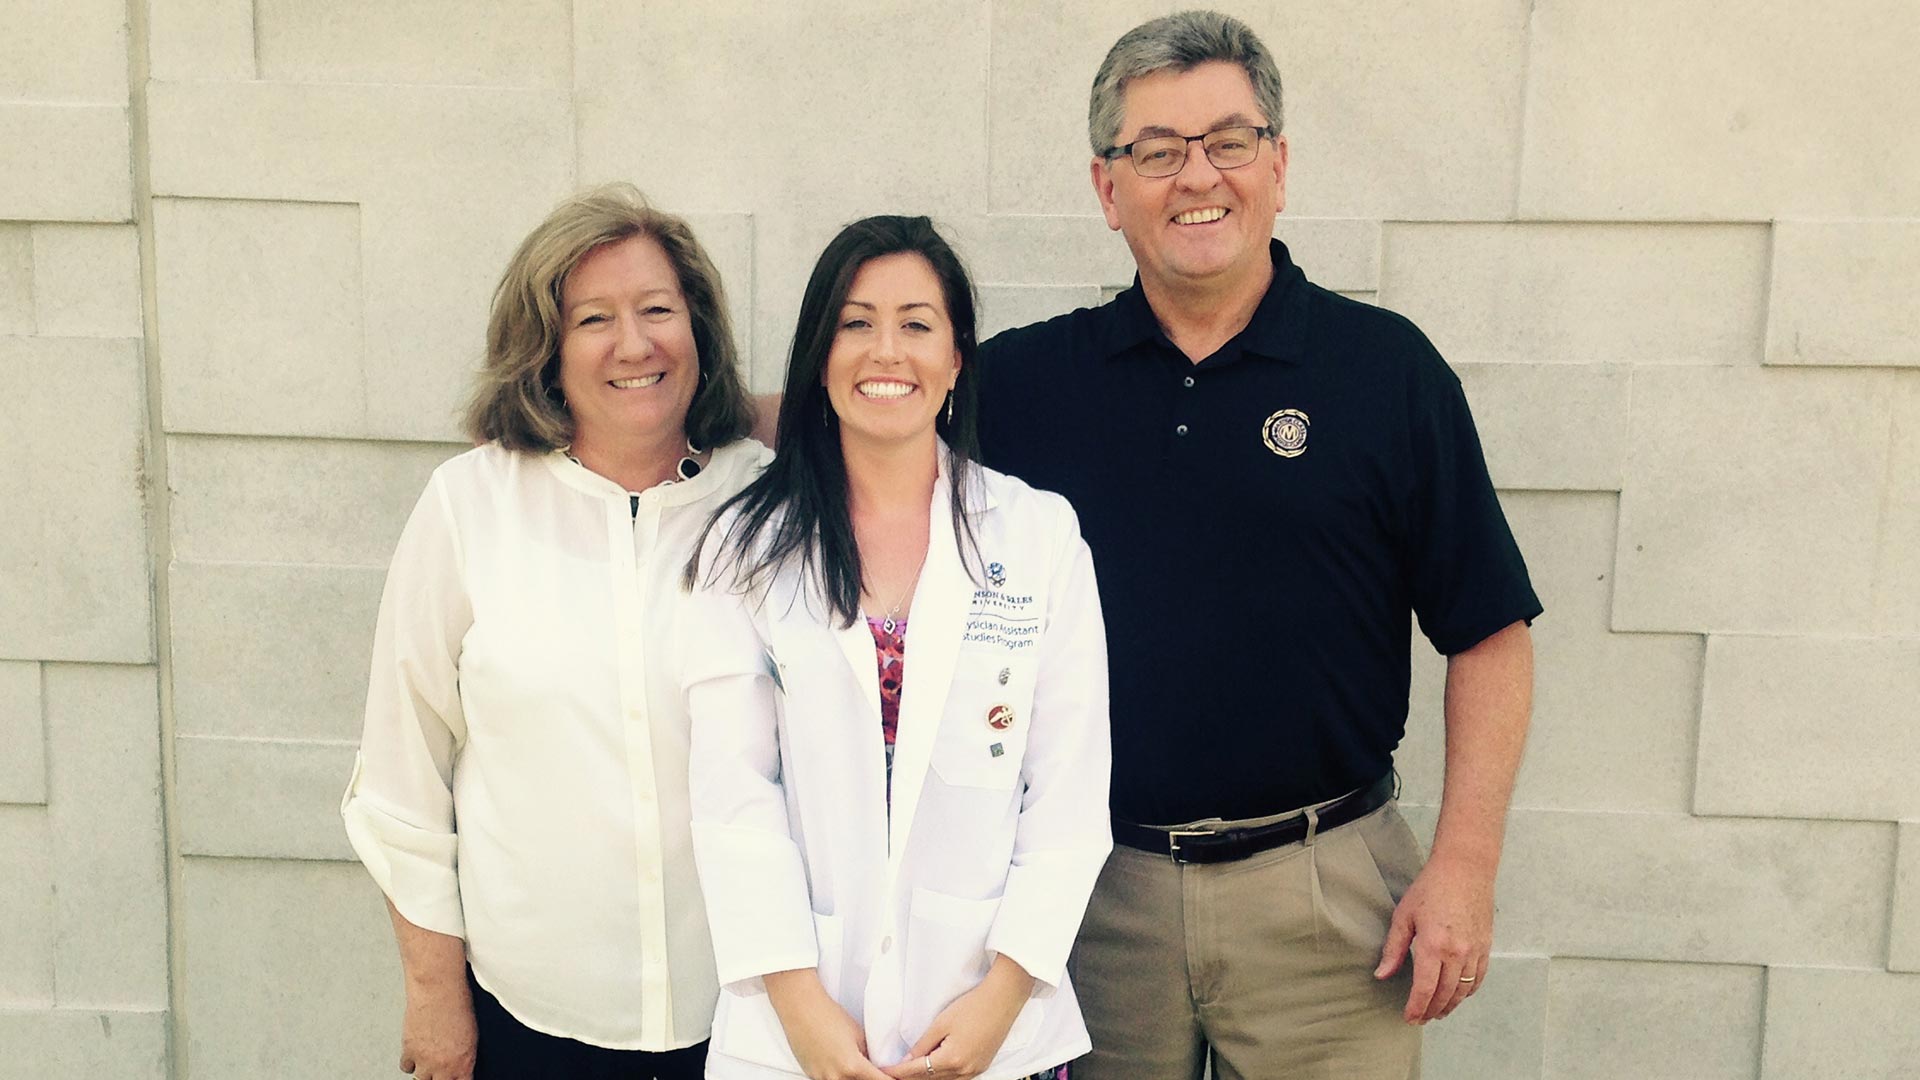 Heisler with parents at the White Coat Ceremony